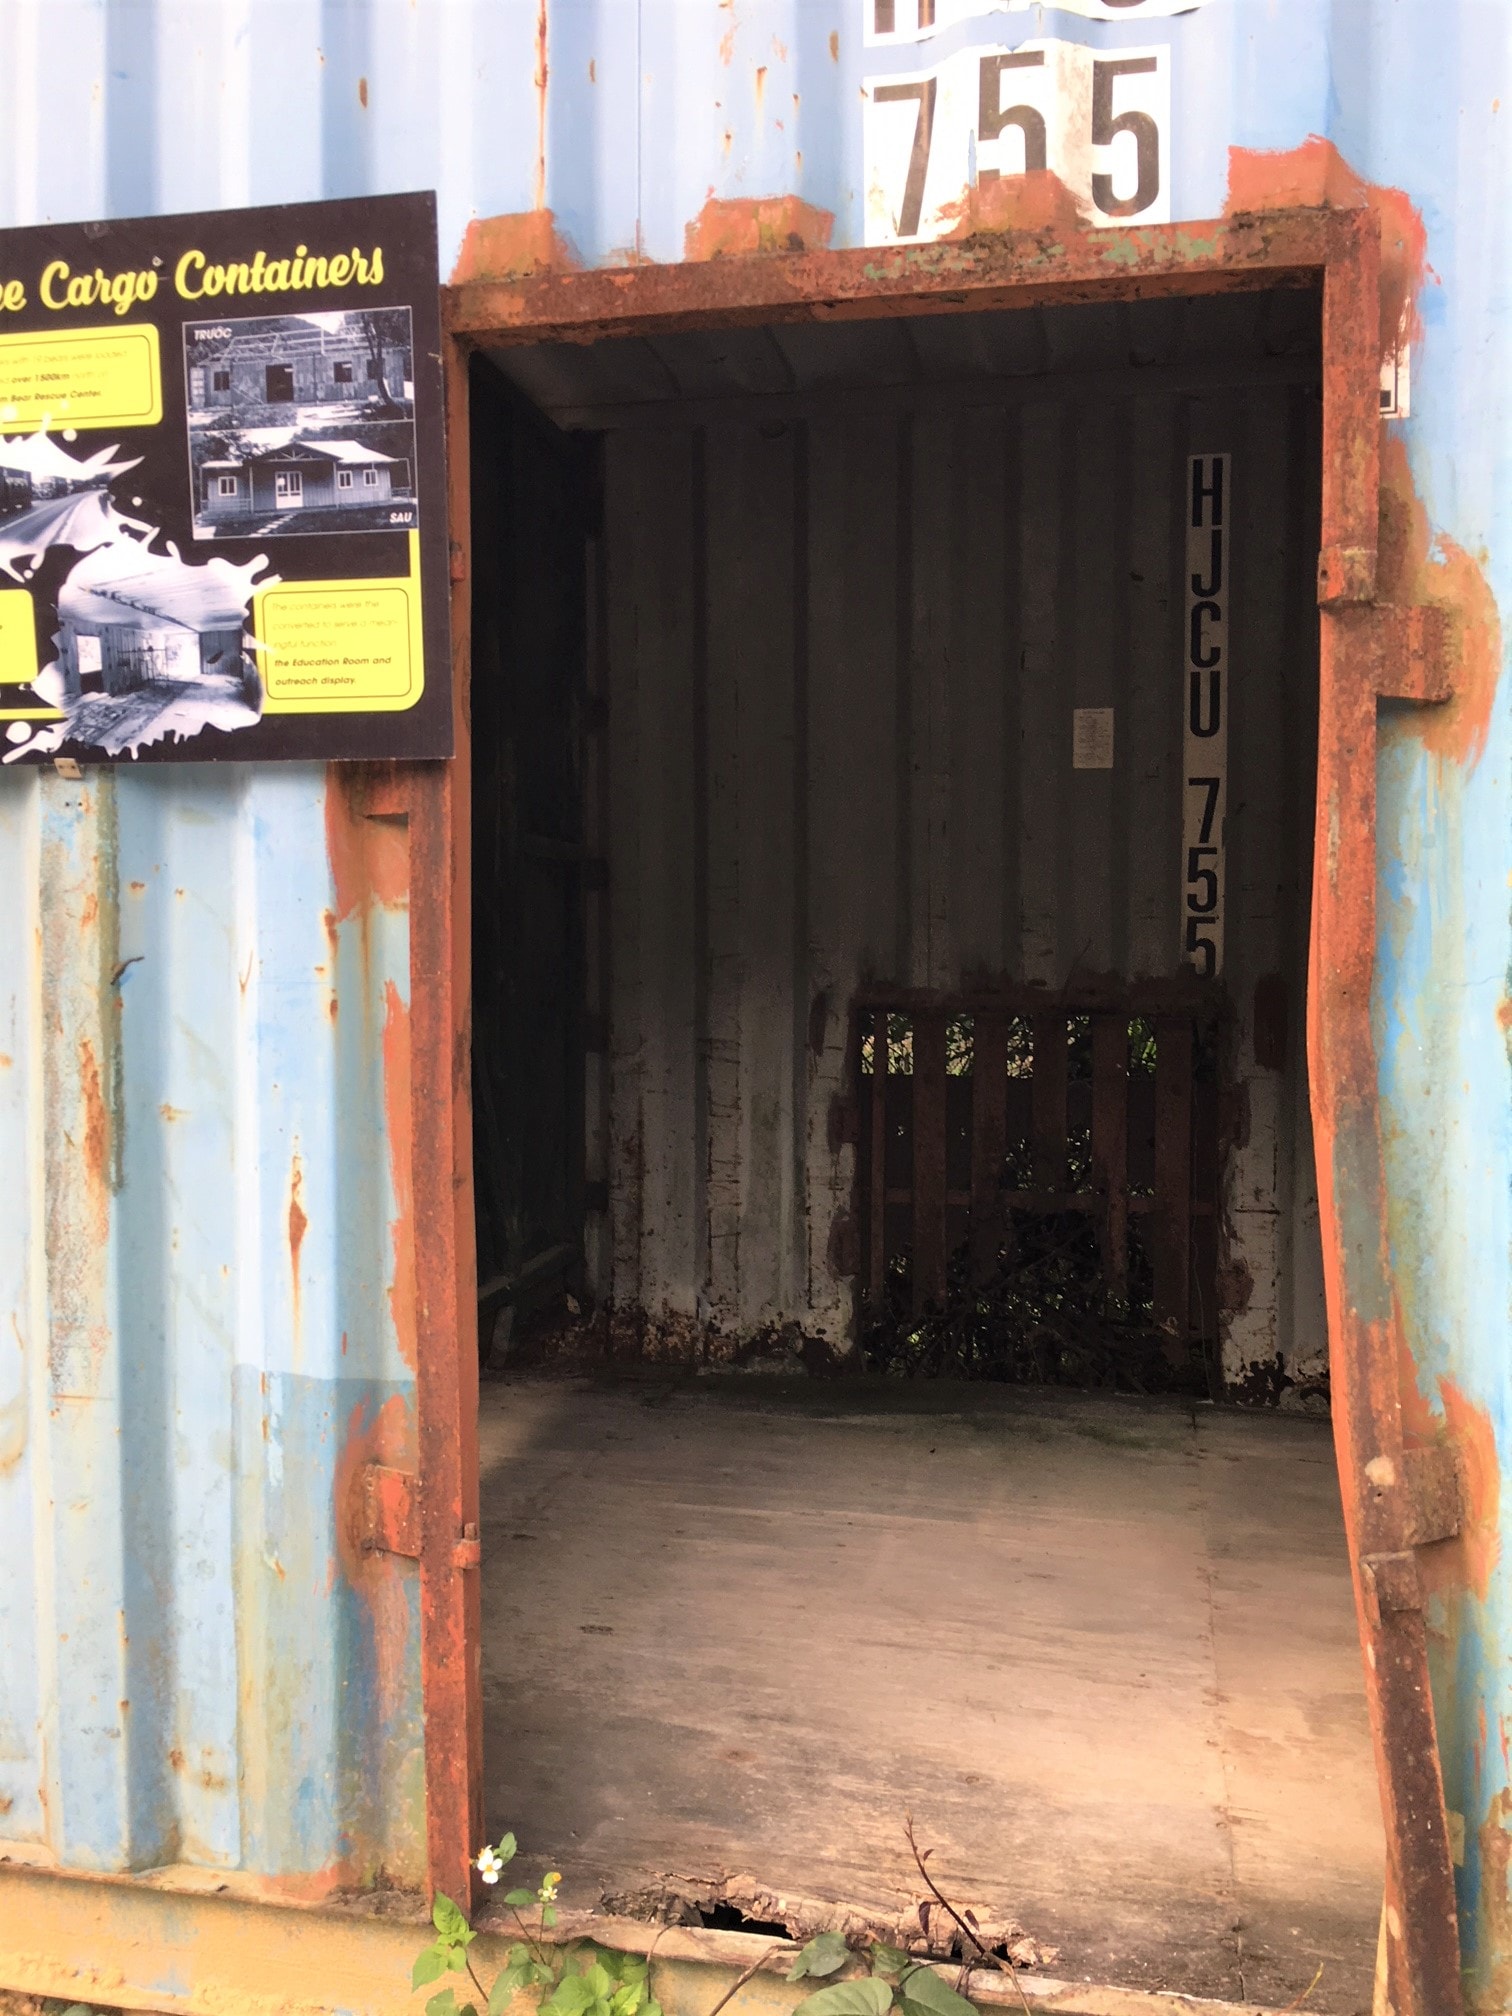 Inside a container which kept from 2 - 3 bears